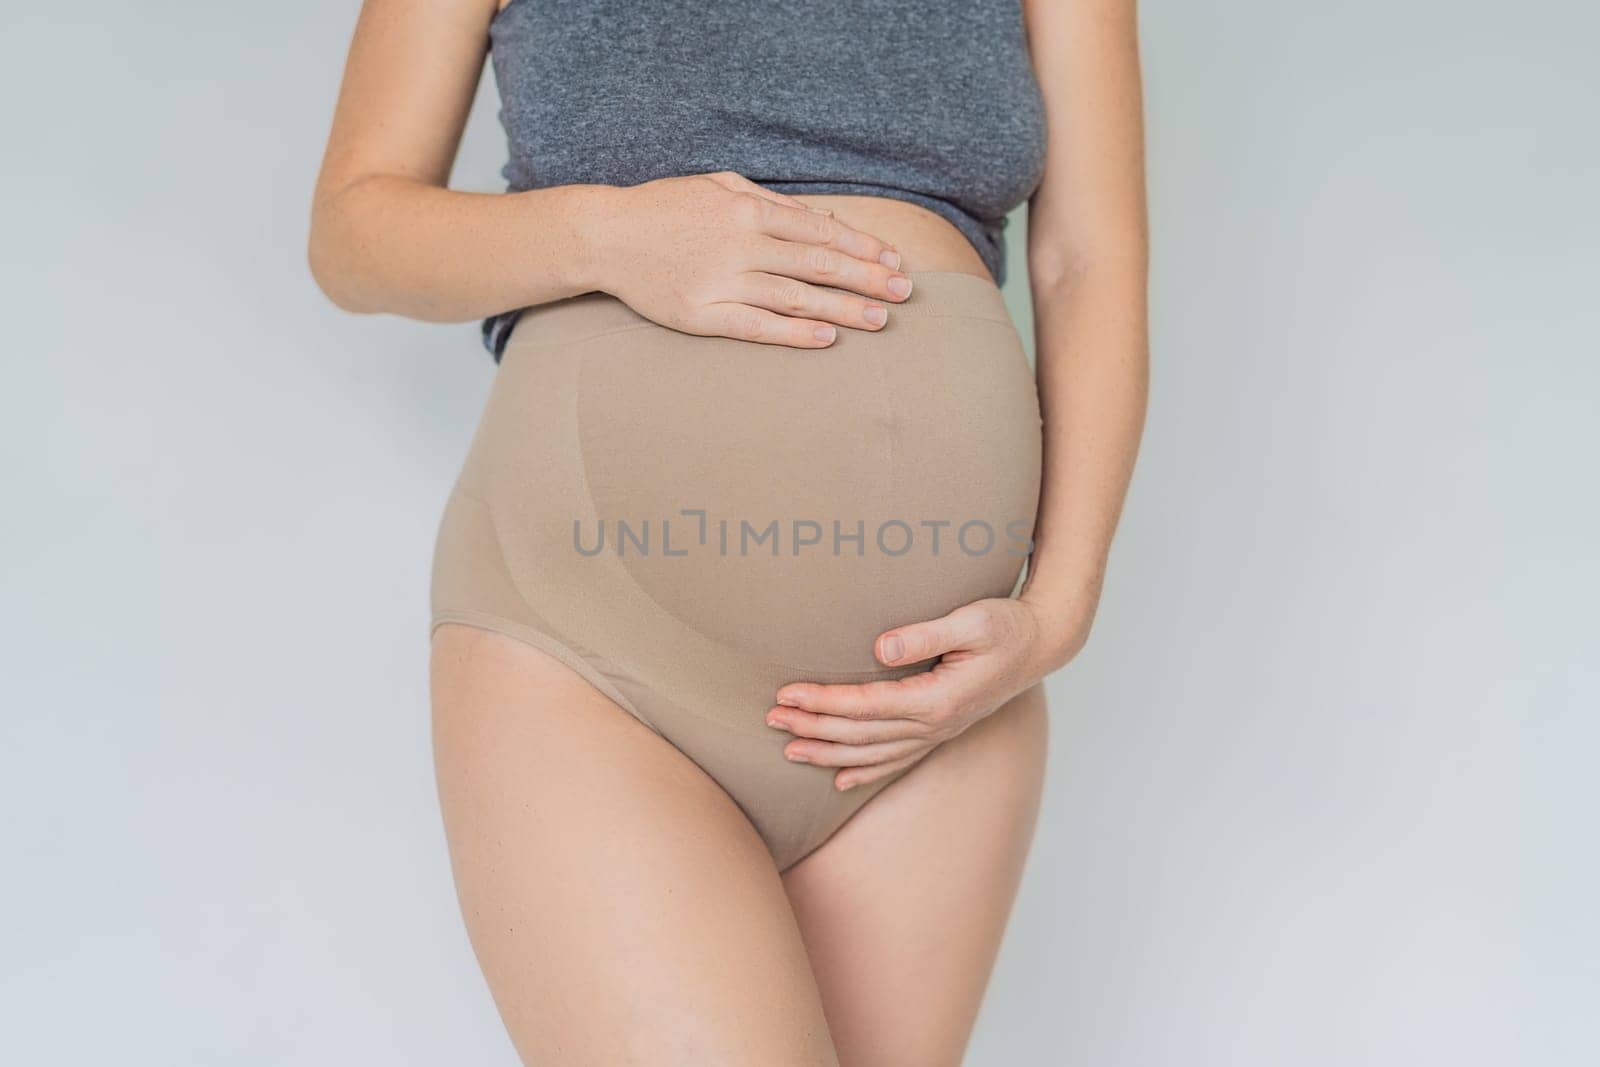 Pregnant bliss: Mom-to-be embraces her baby bump with a soft fabric bandage, providing gentle support. Maternity made comfortable by galitskaya